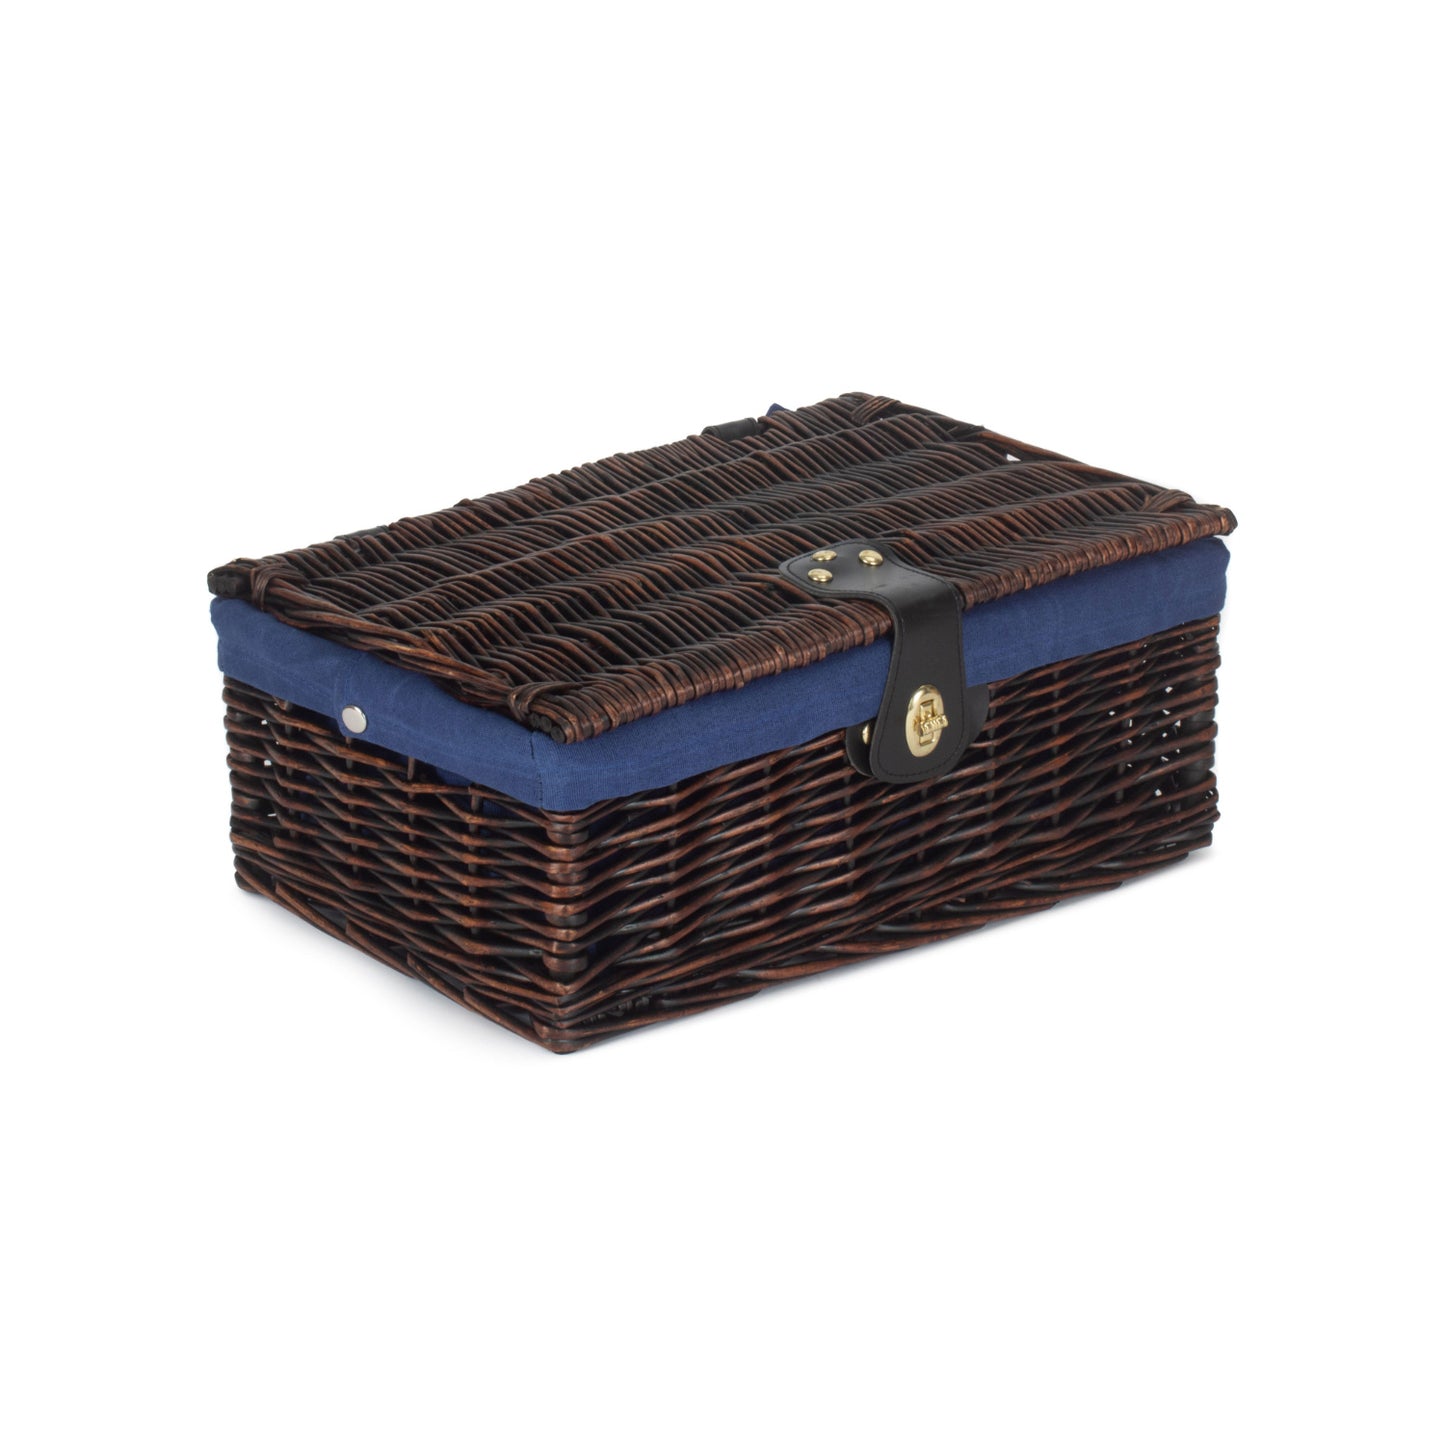 14 Inch Chocolate Brown Hamper With Navy Blue Lining